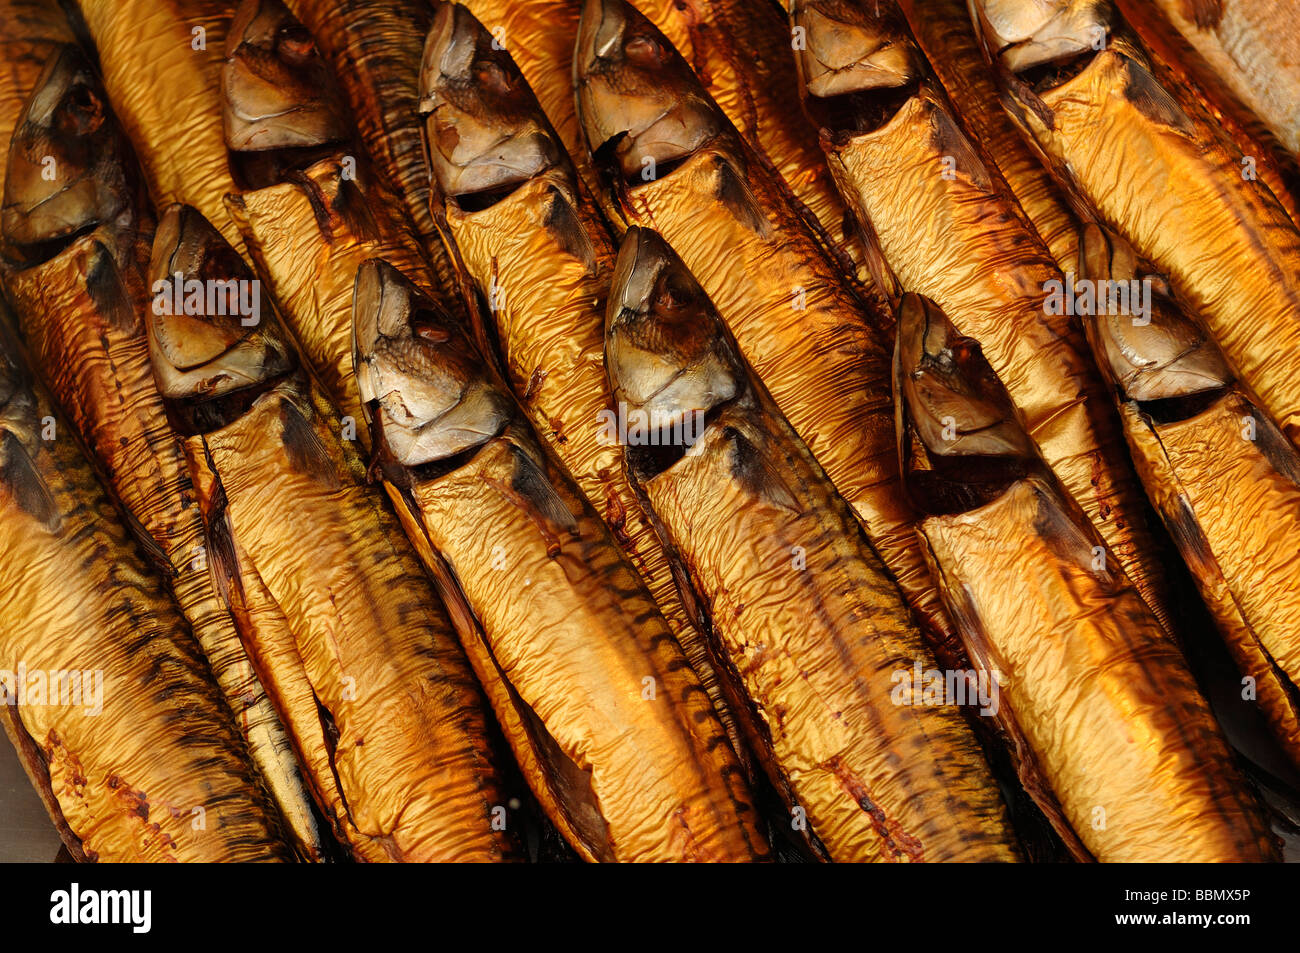 Smoked Mackerel (Scomber scombrus) in a seafood shop, Lueneburg, Lower Saxony, Germany, Europe Stock Photo